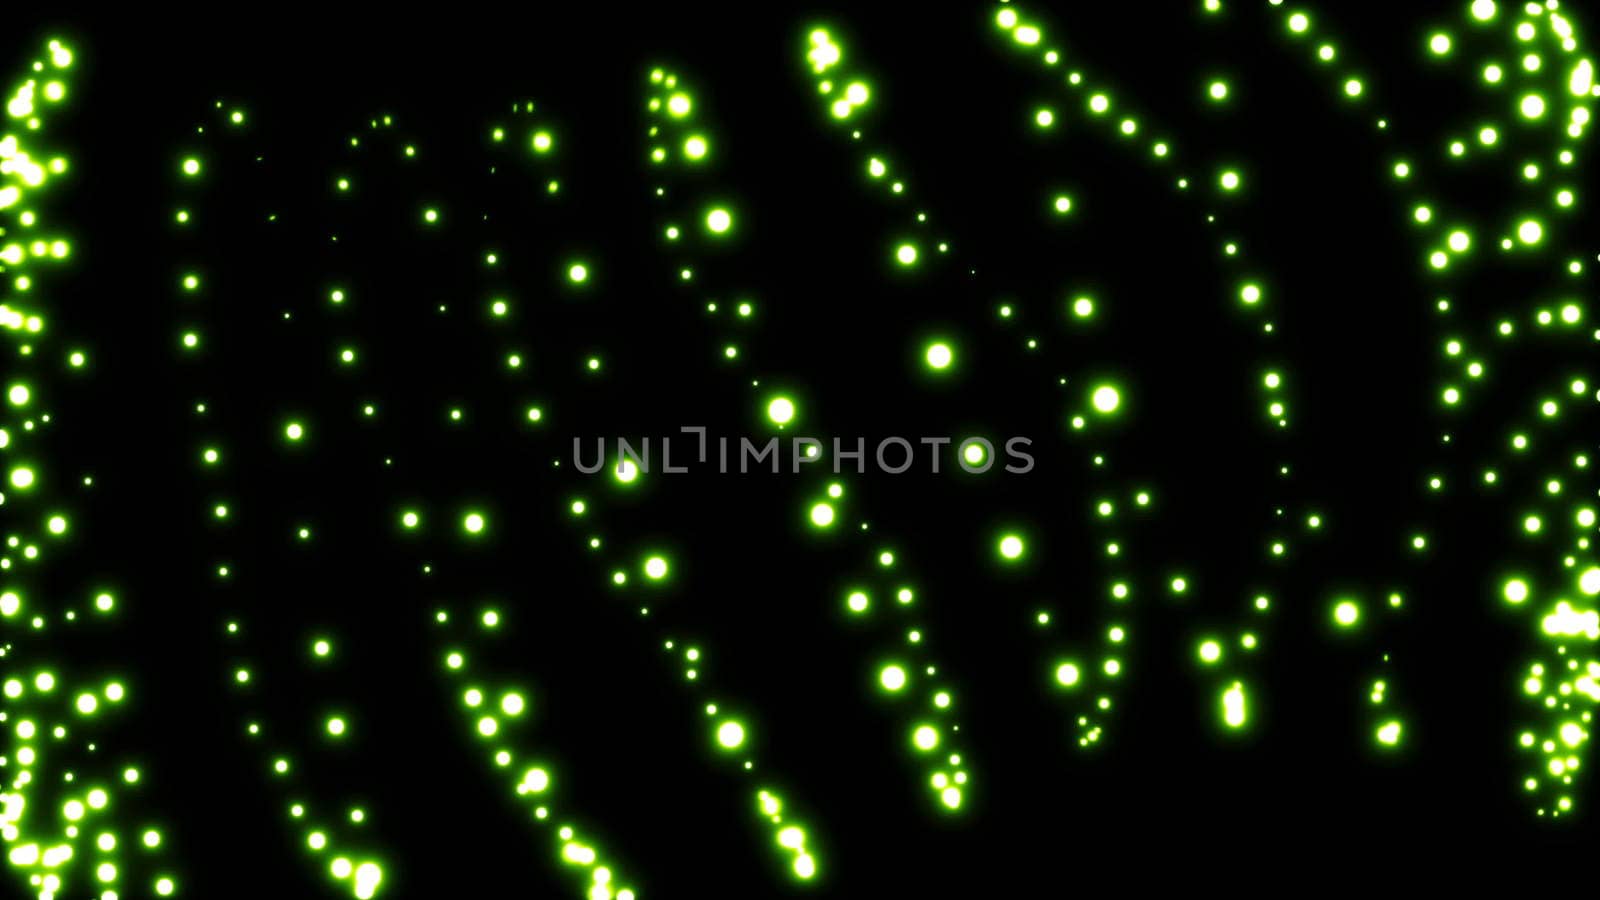 Abstract background with waving particles. Circular form